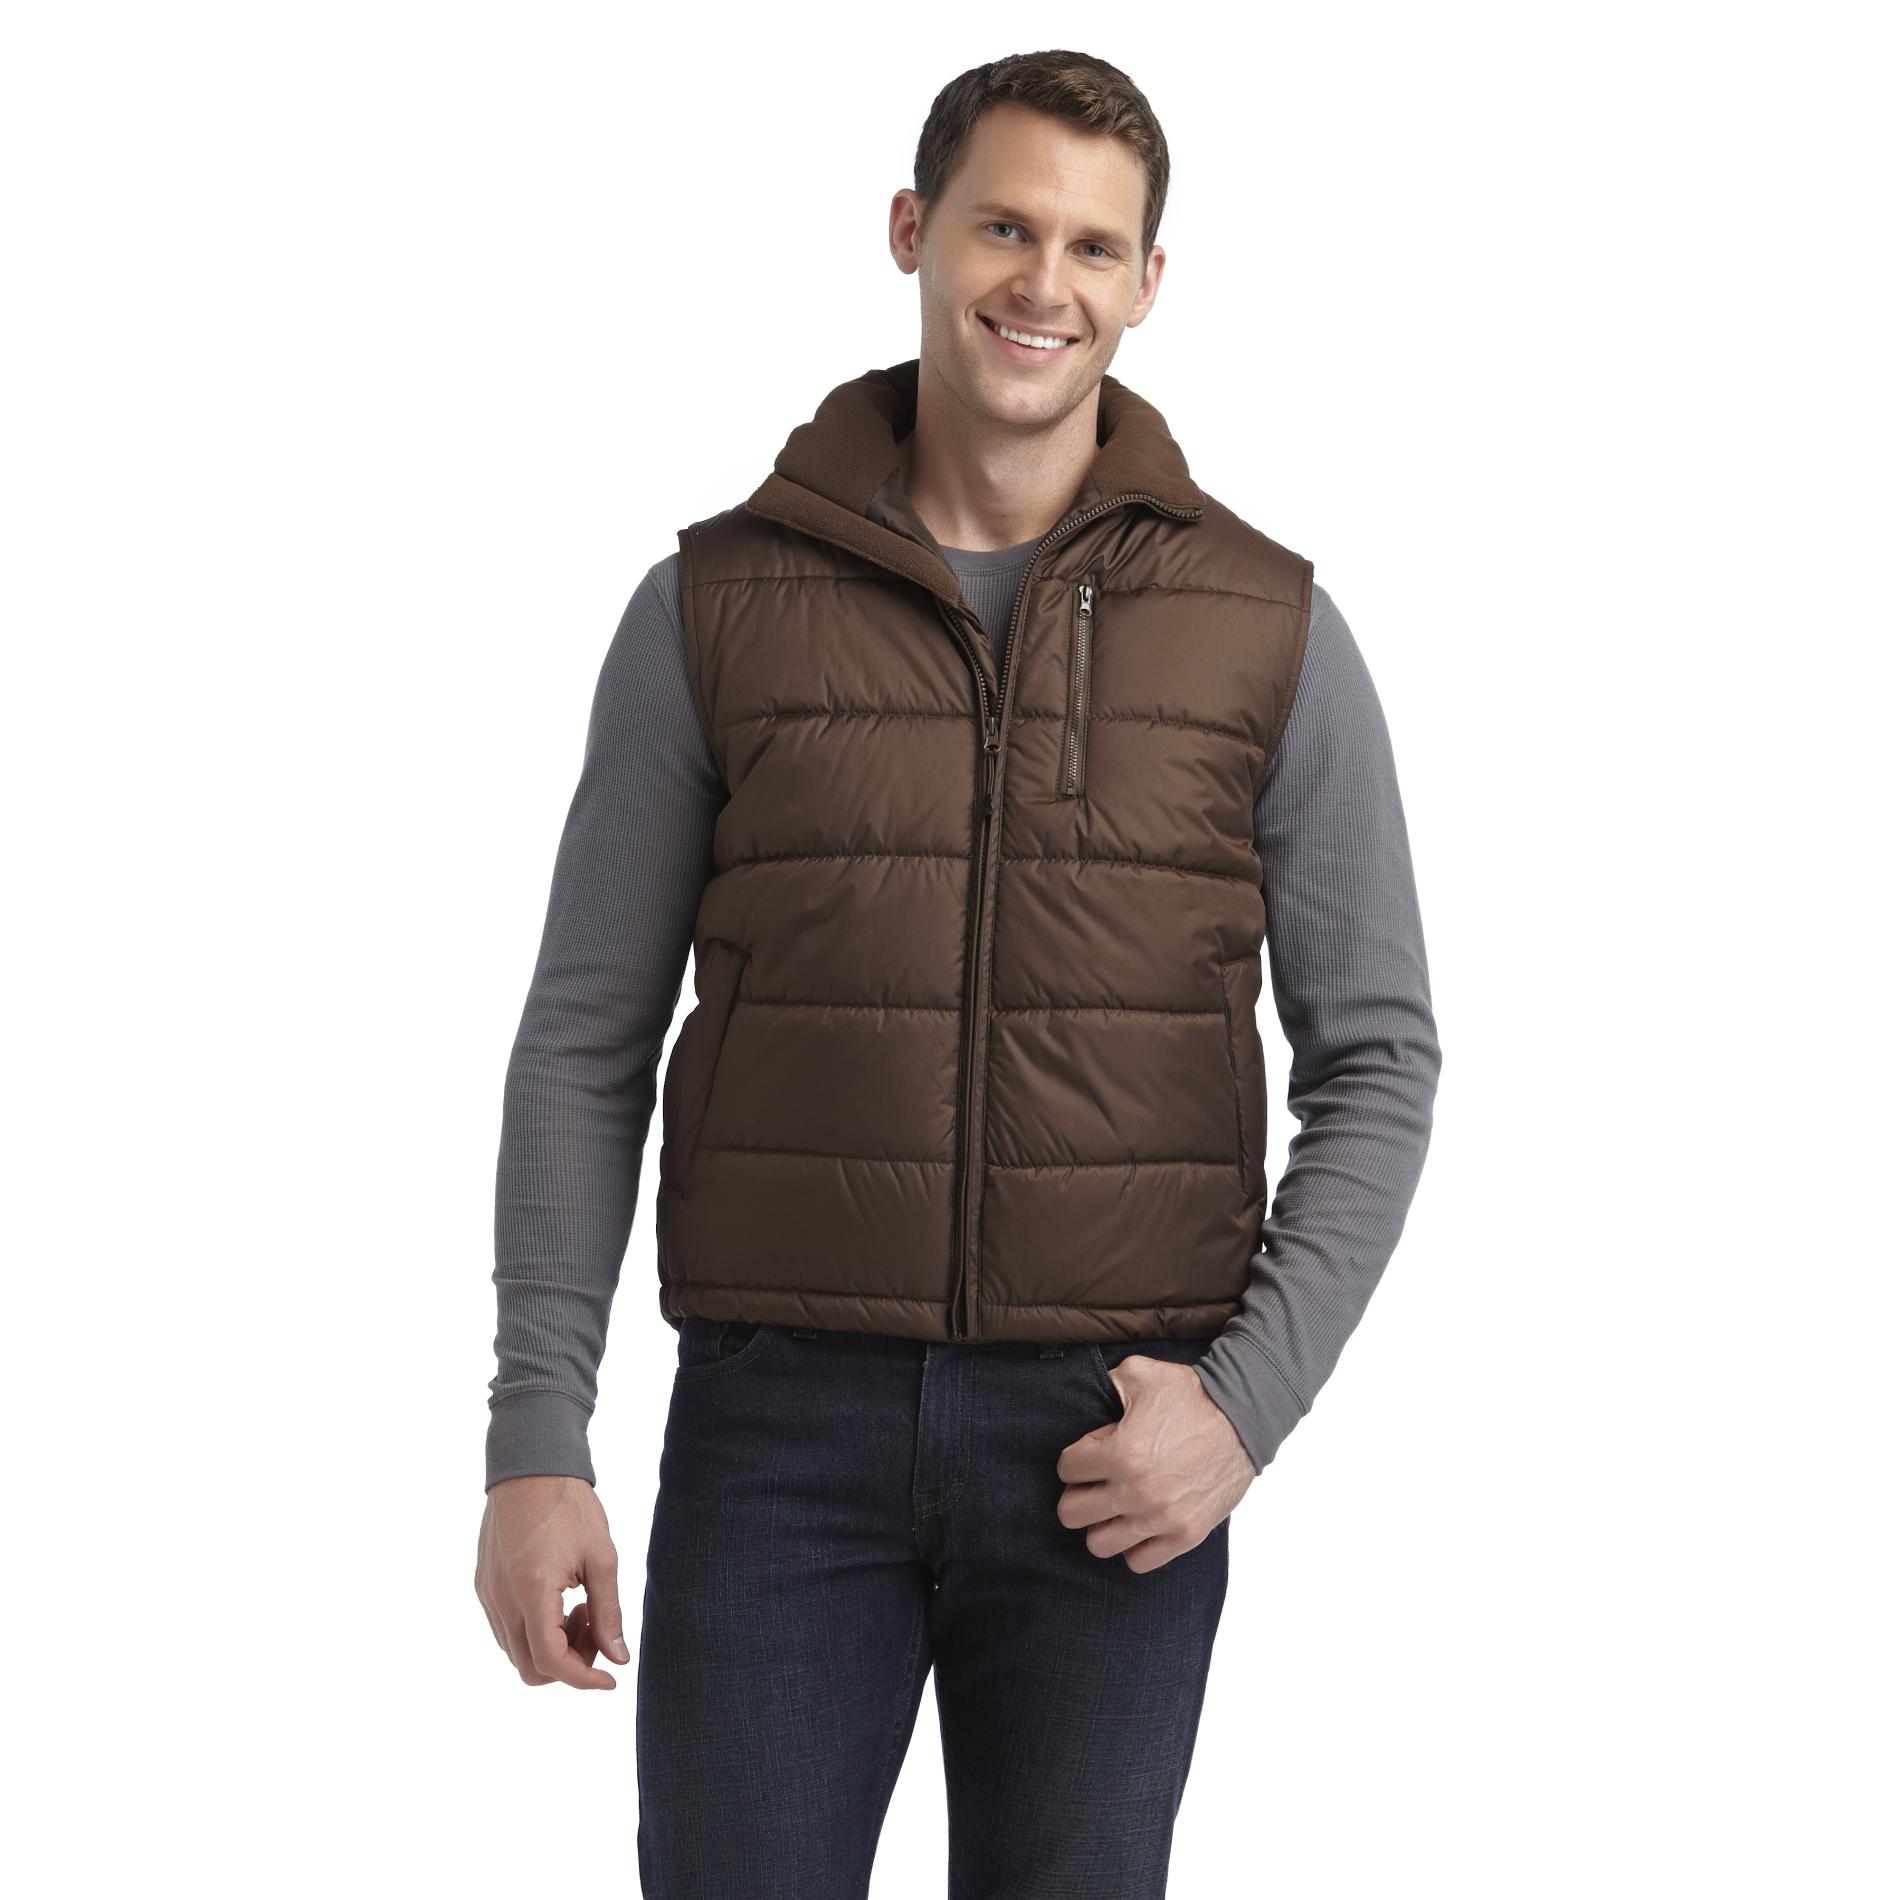 Men’s Quilted Puffer Vest Only $9.99 Today + Free Pickup! (Was $50)